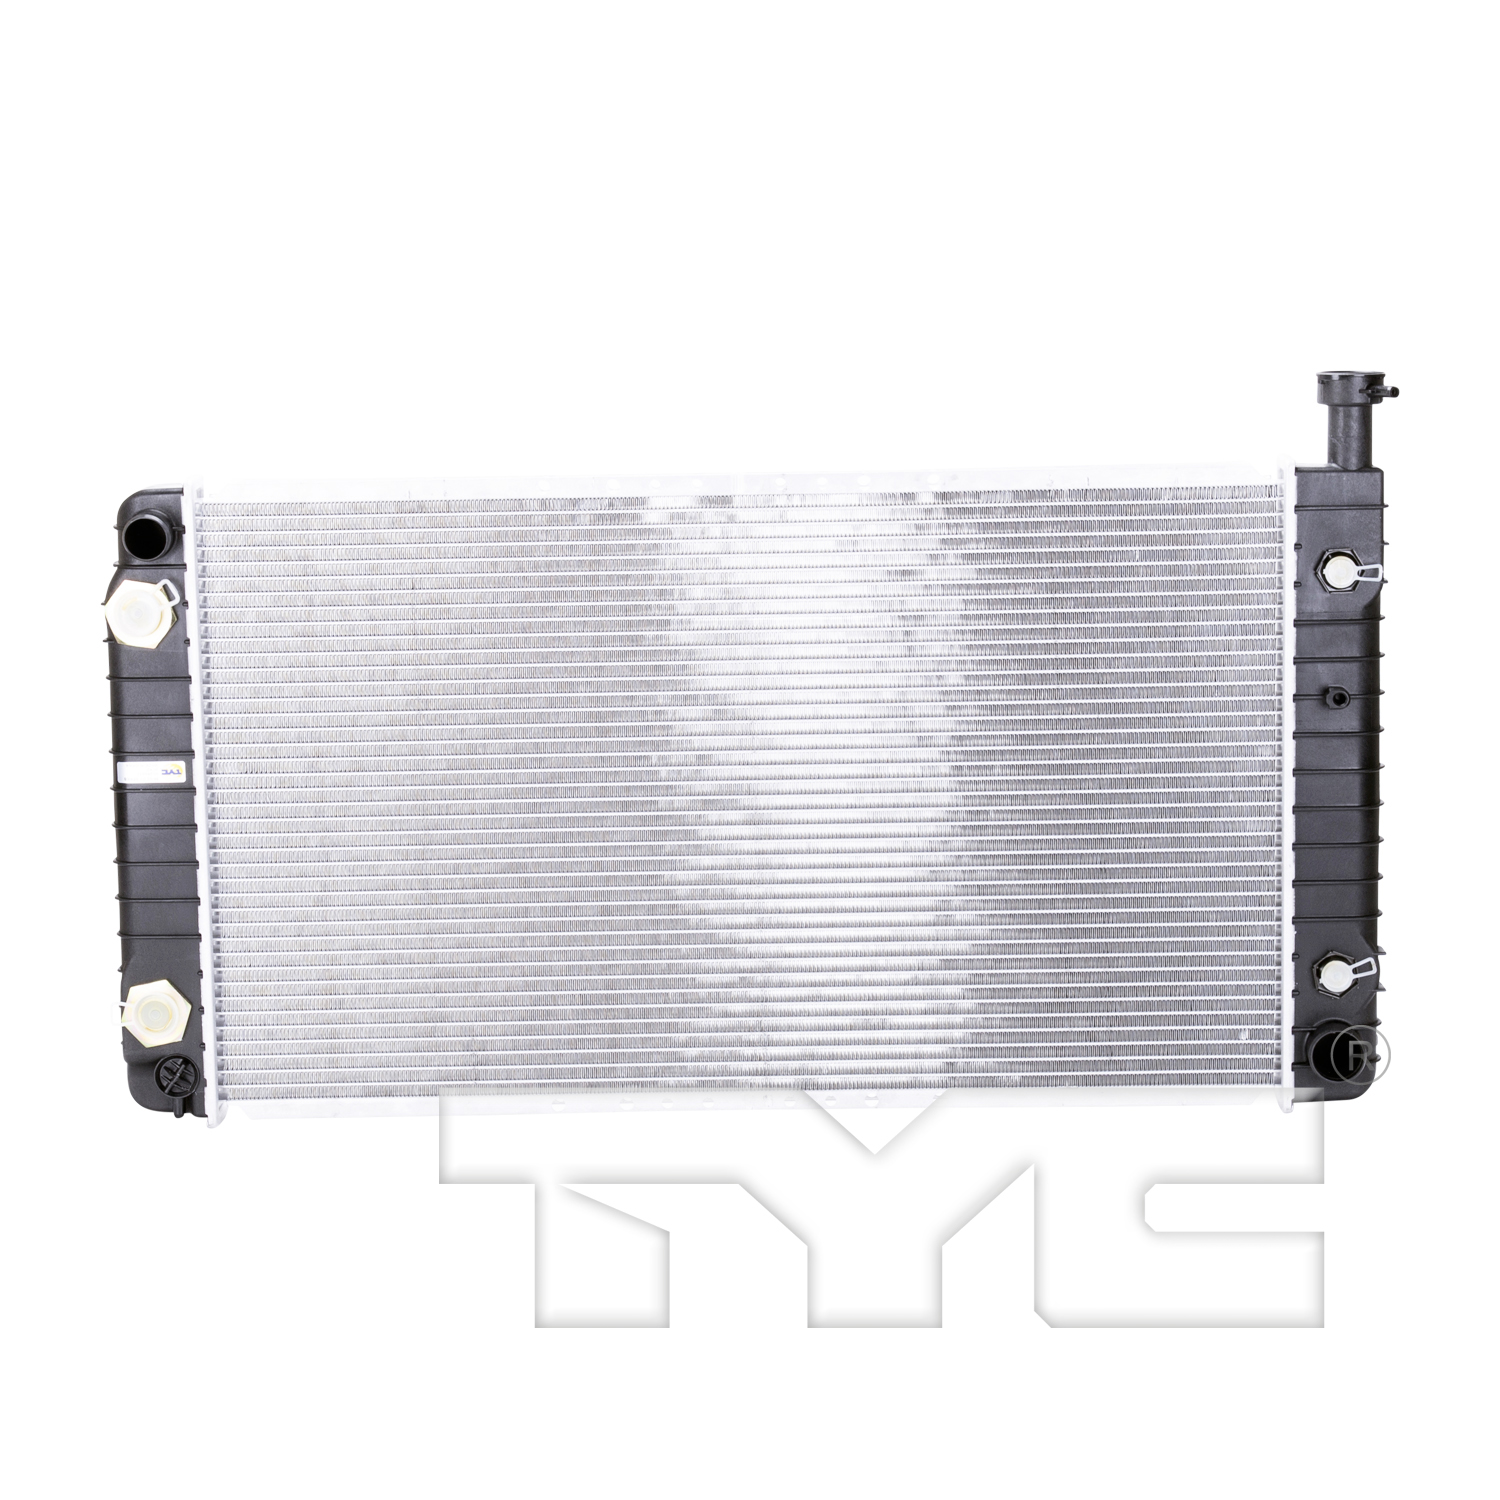 Aftermarket RADIATORS for CHEVROLET - EXPRESS 2500, EXPRESS 2500,97-02,Radiator assembly